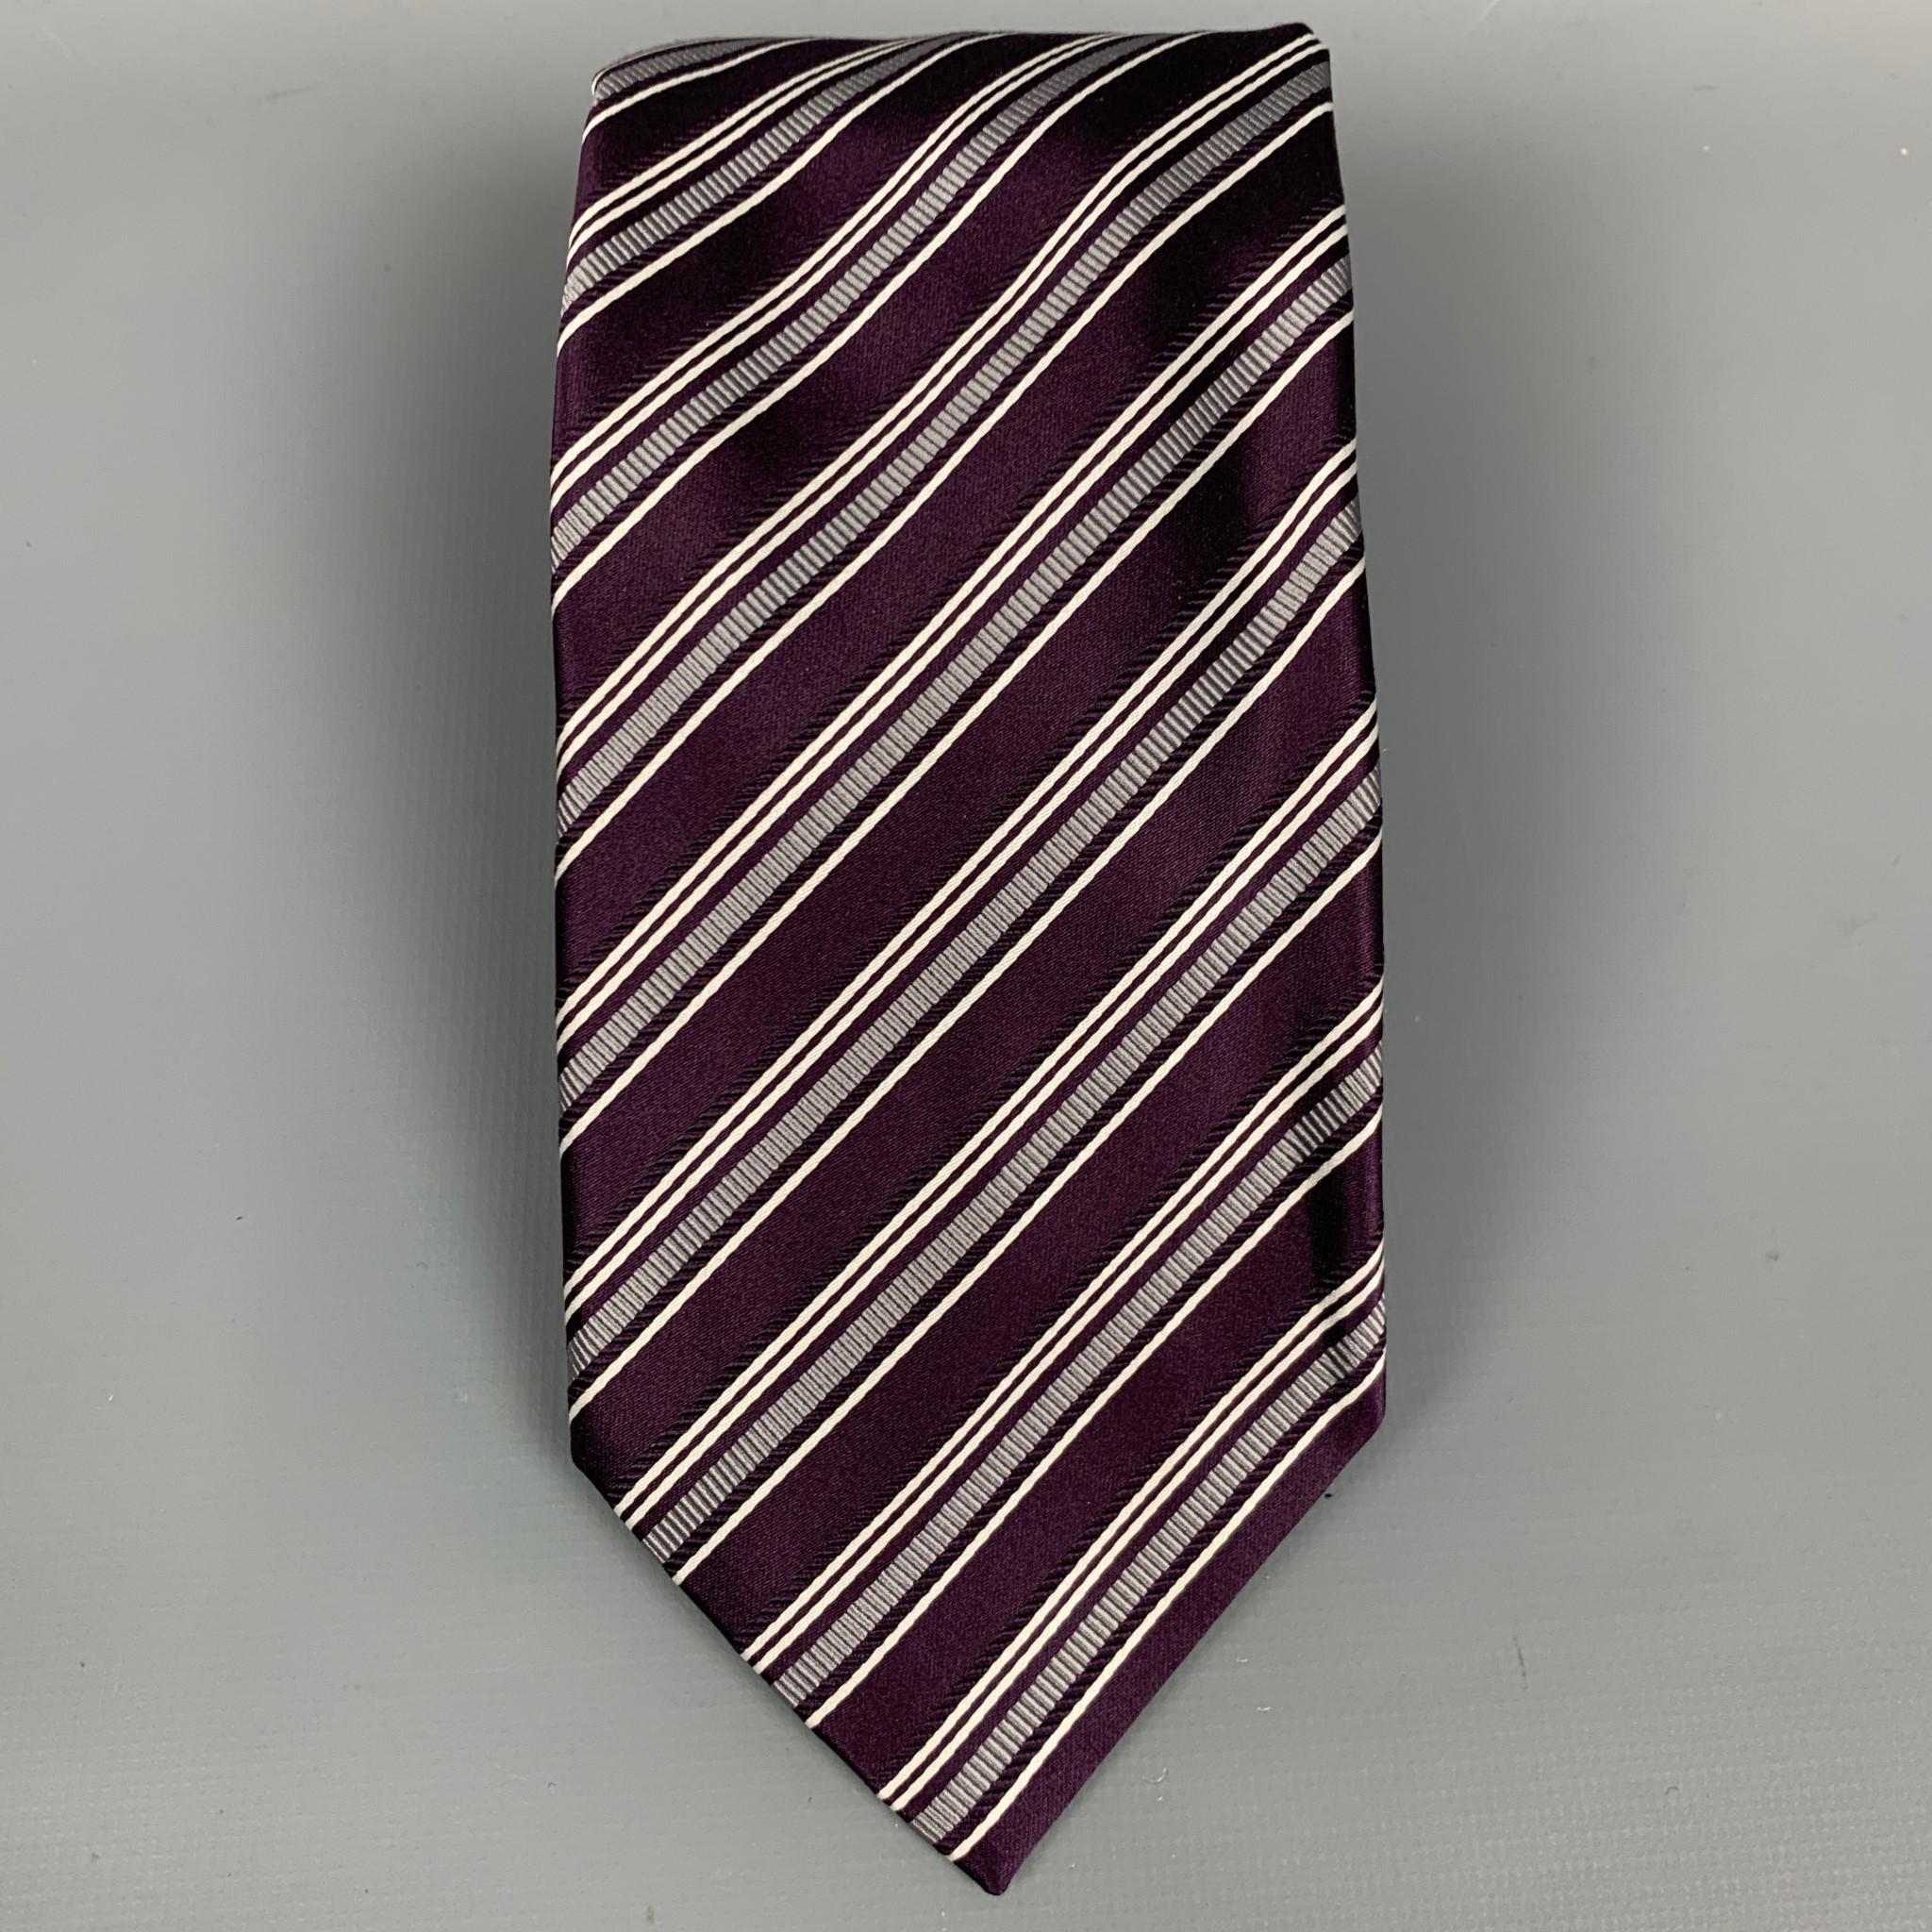 BRIONI neck tie comes in a eggplant & white stripe print silk. Handmade in Italy.

Very Good Pre-Owned Condition.

Measurements:

Width: 3.5 in.  